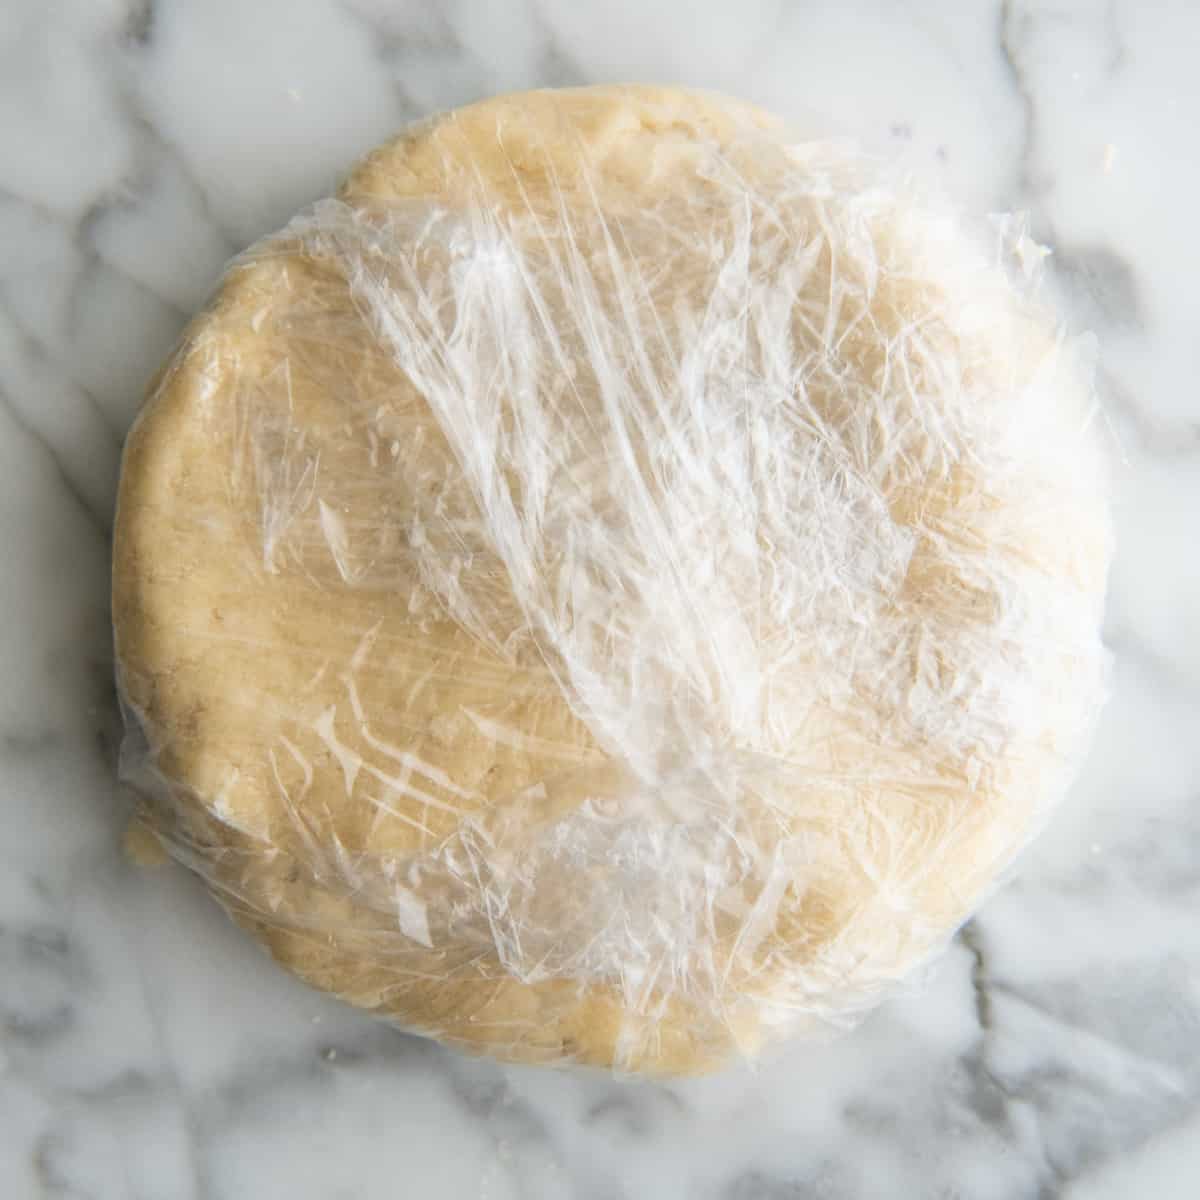 dairy free pie crust wrapped in plastic wrap to chill